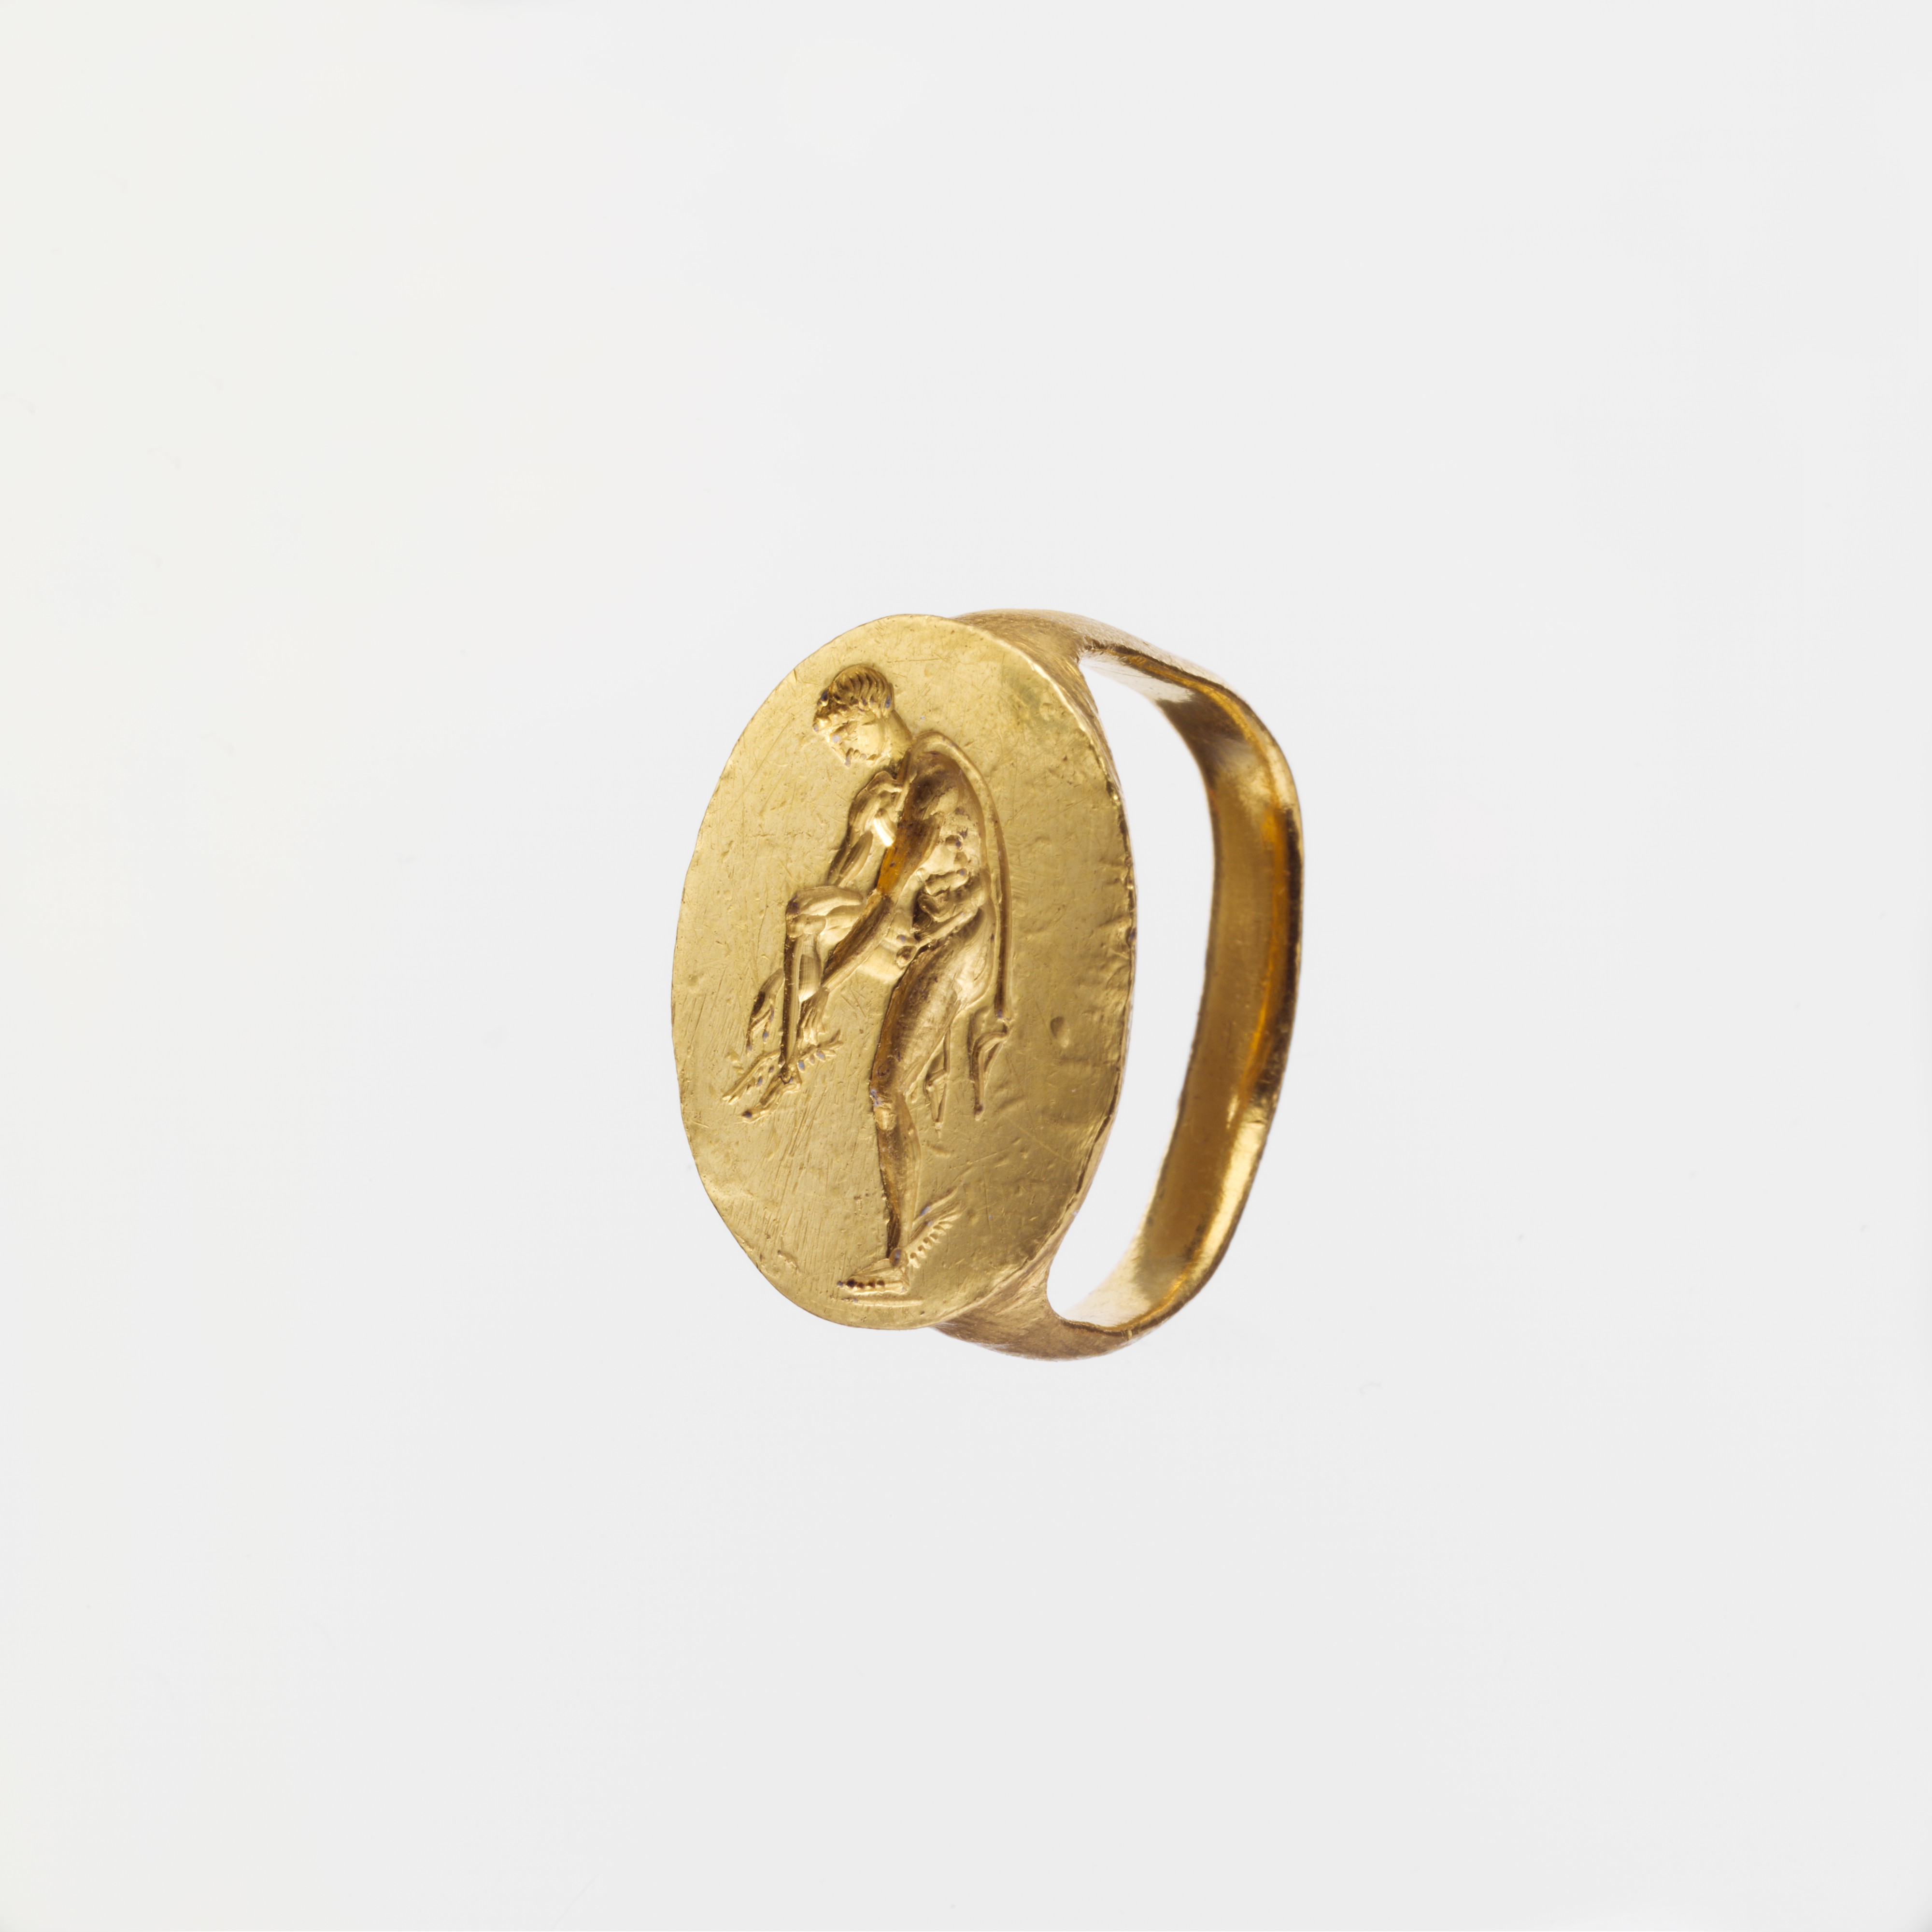 File:Gold finger ring engraved with an image of Hermes MET DP165296.jpg - Wikimedia Commons